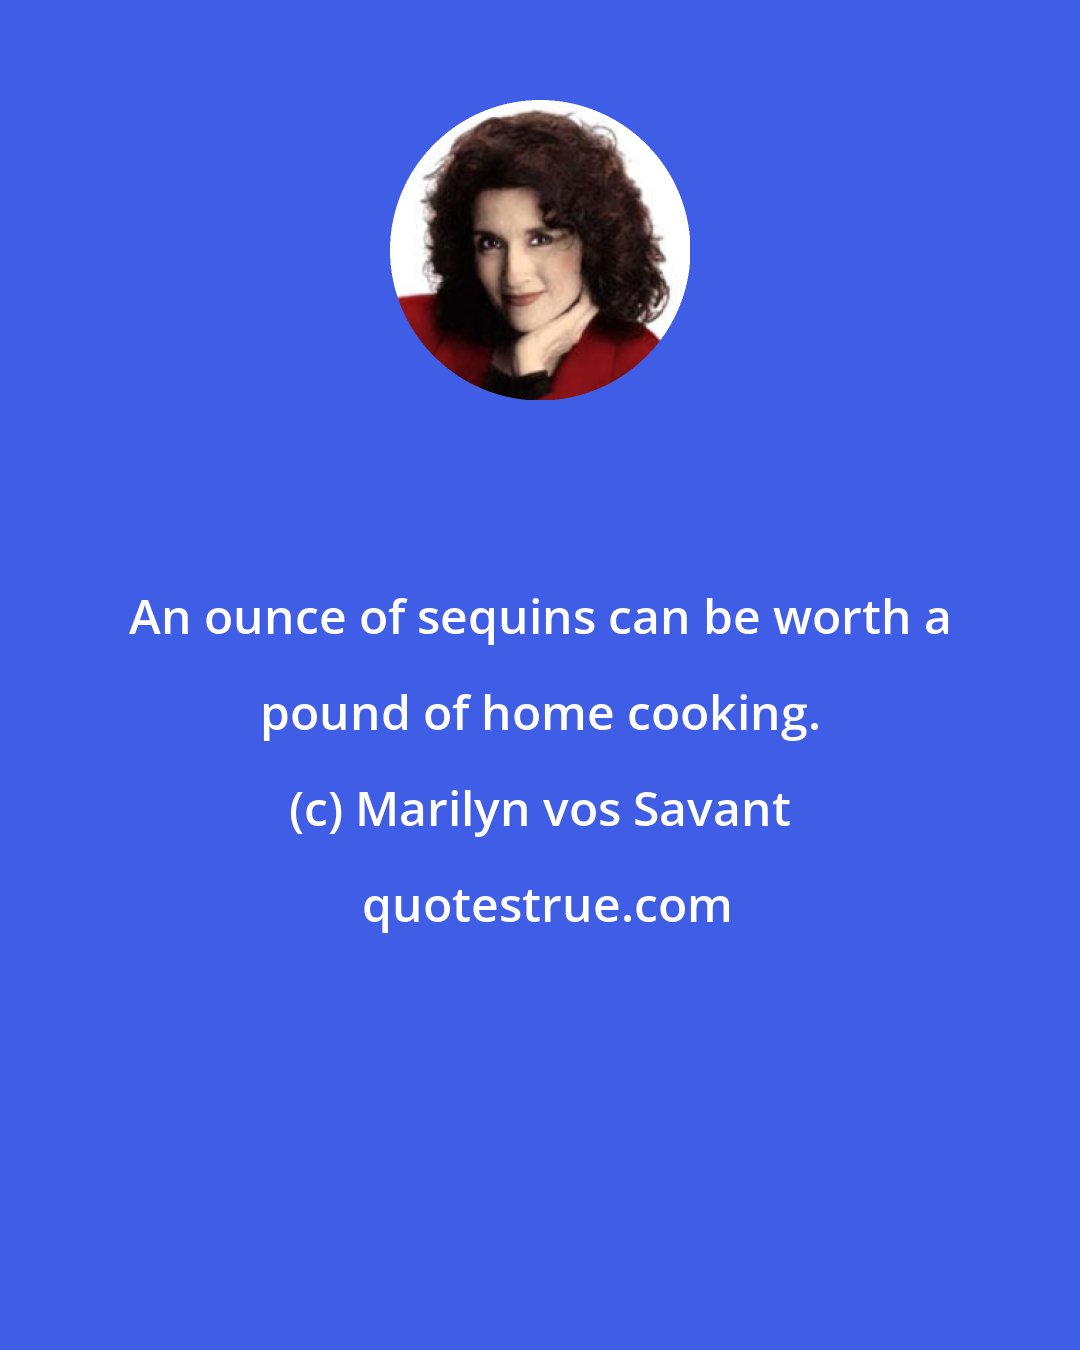 Marilyn vos Savant: An ounce of sequins can be worth a pound of home cooking.